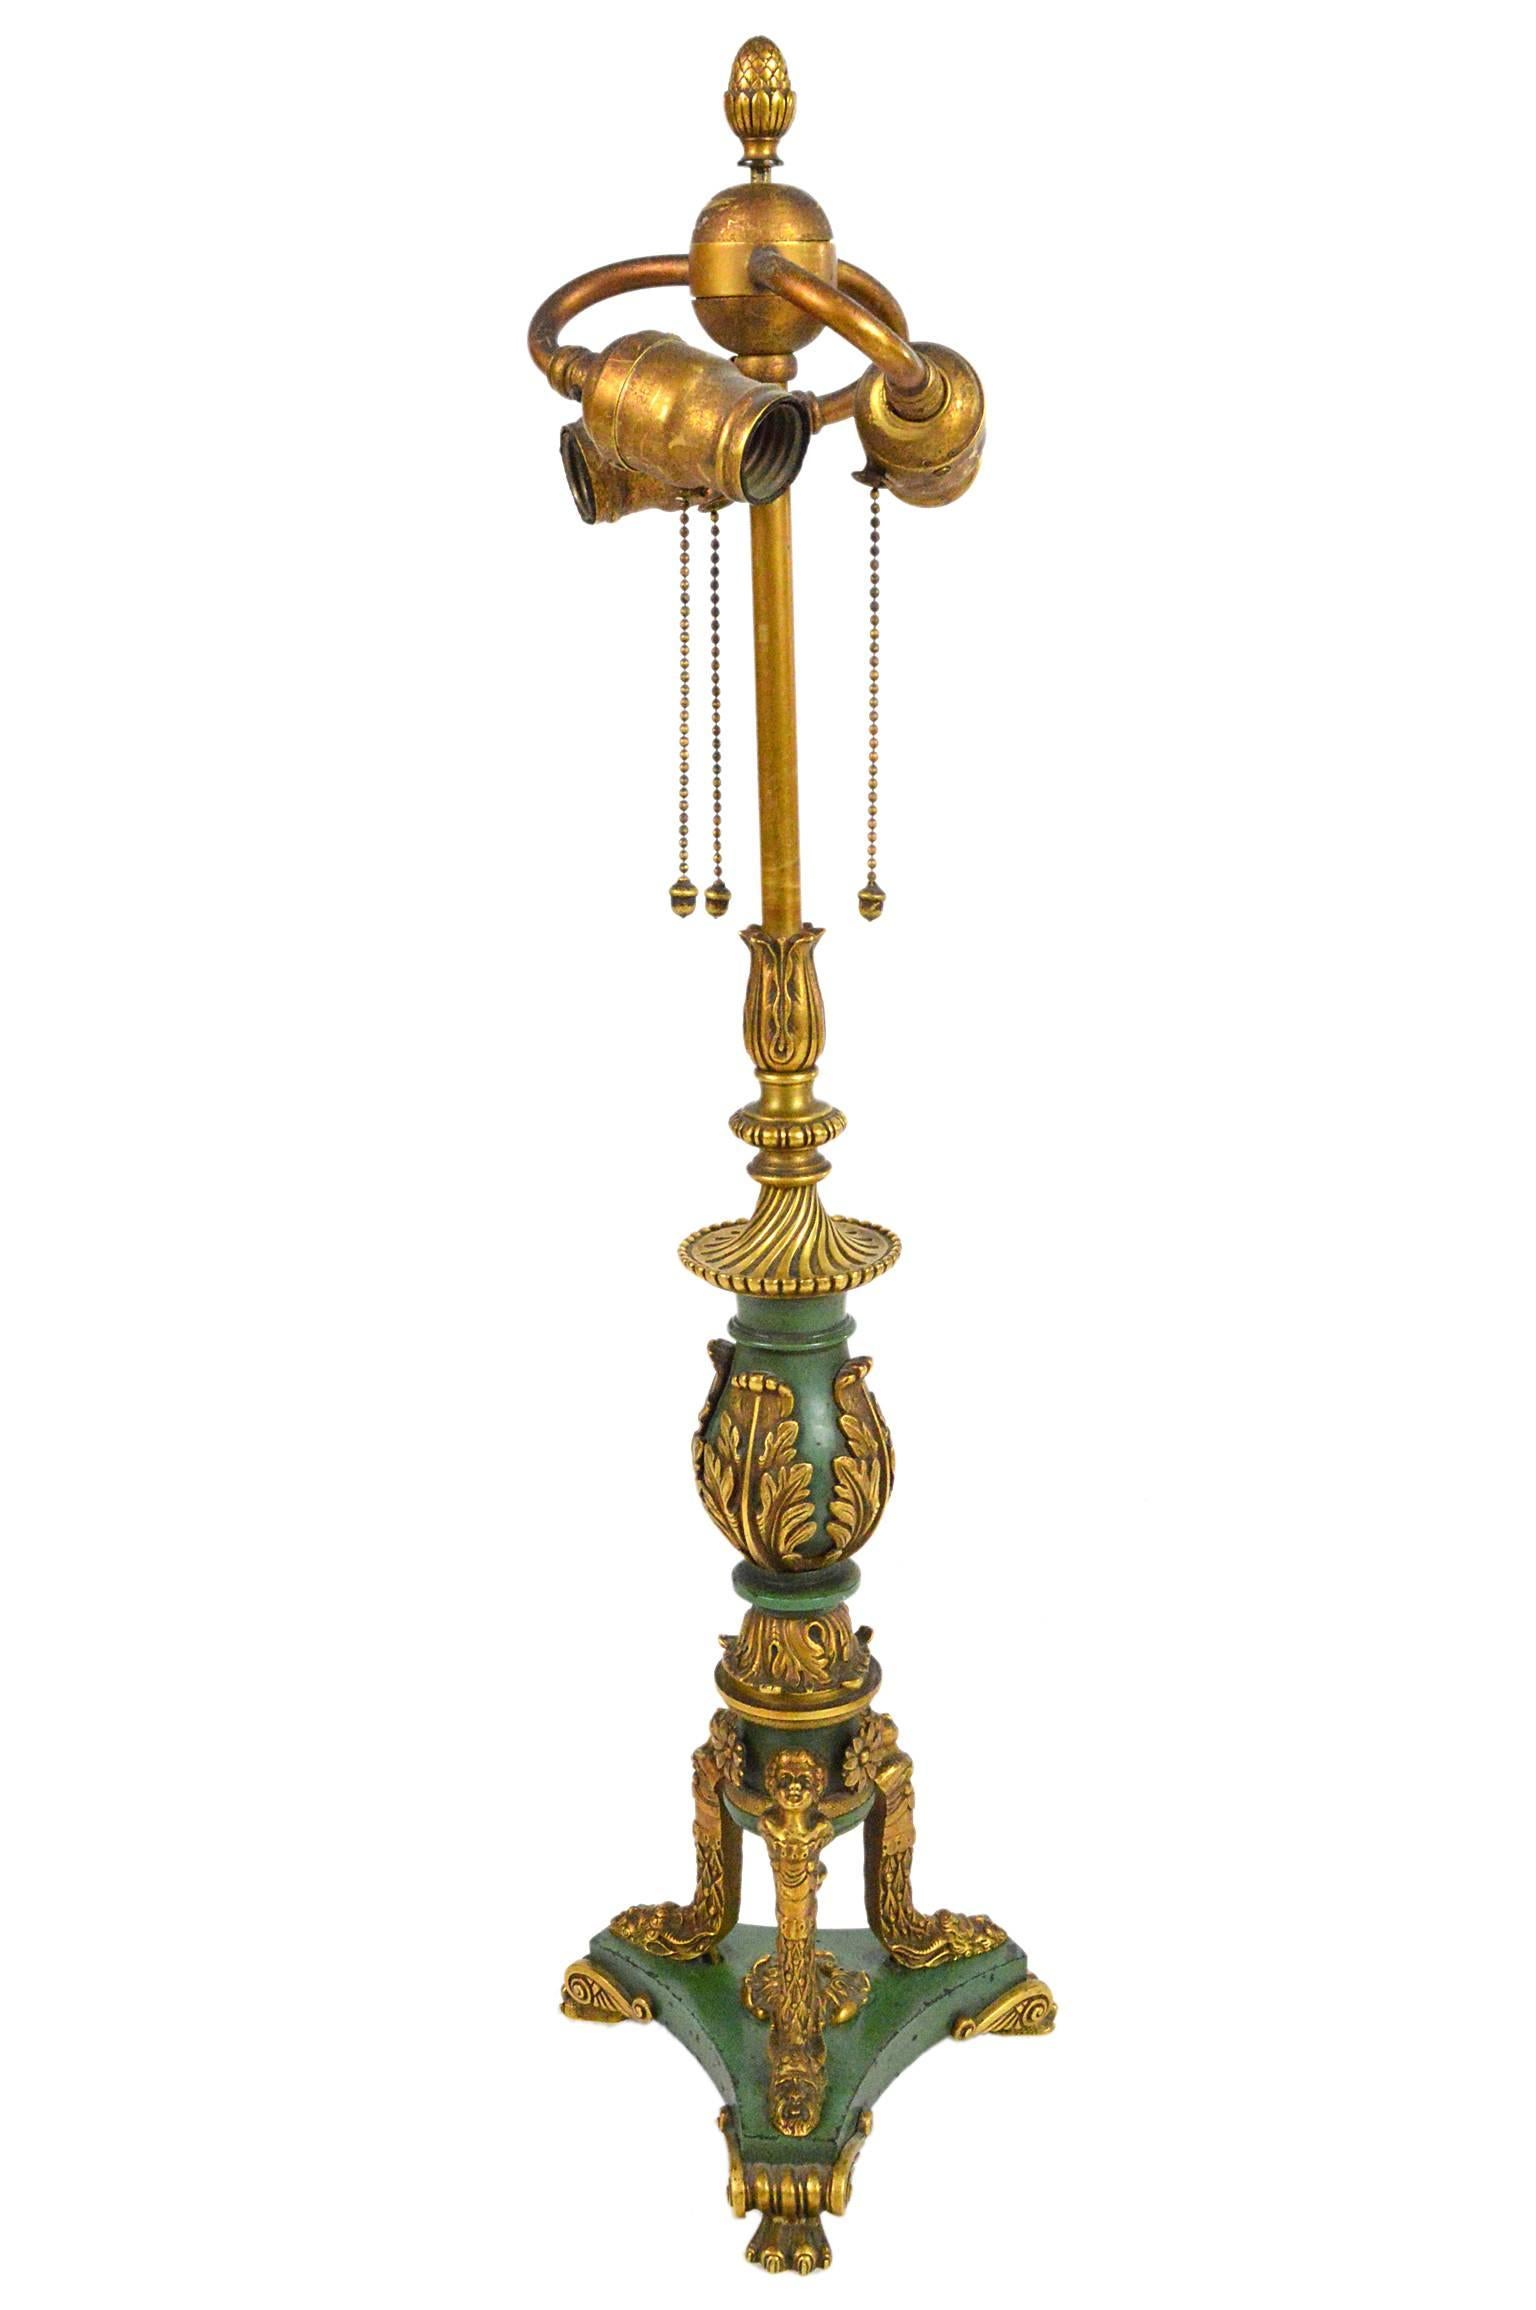 Empire style gilt bronze and painted table lamp having center decorated acanthus leaves, three hubbell sockets, tripartite base with cherub heads and bacchus masks; ending in paw feet. Attributed to E.F. Caldwell, NY.

